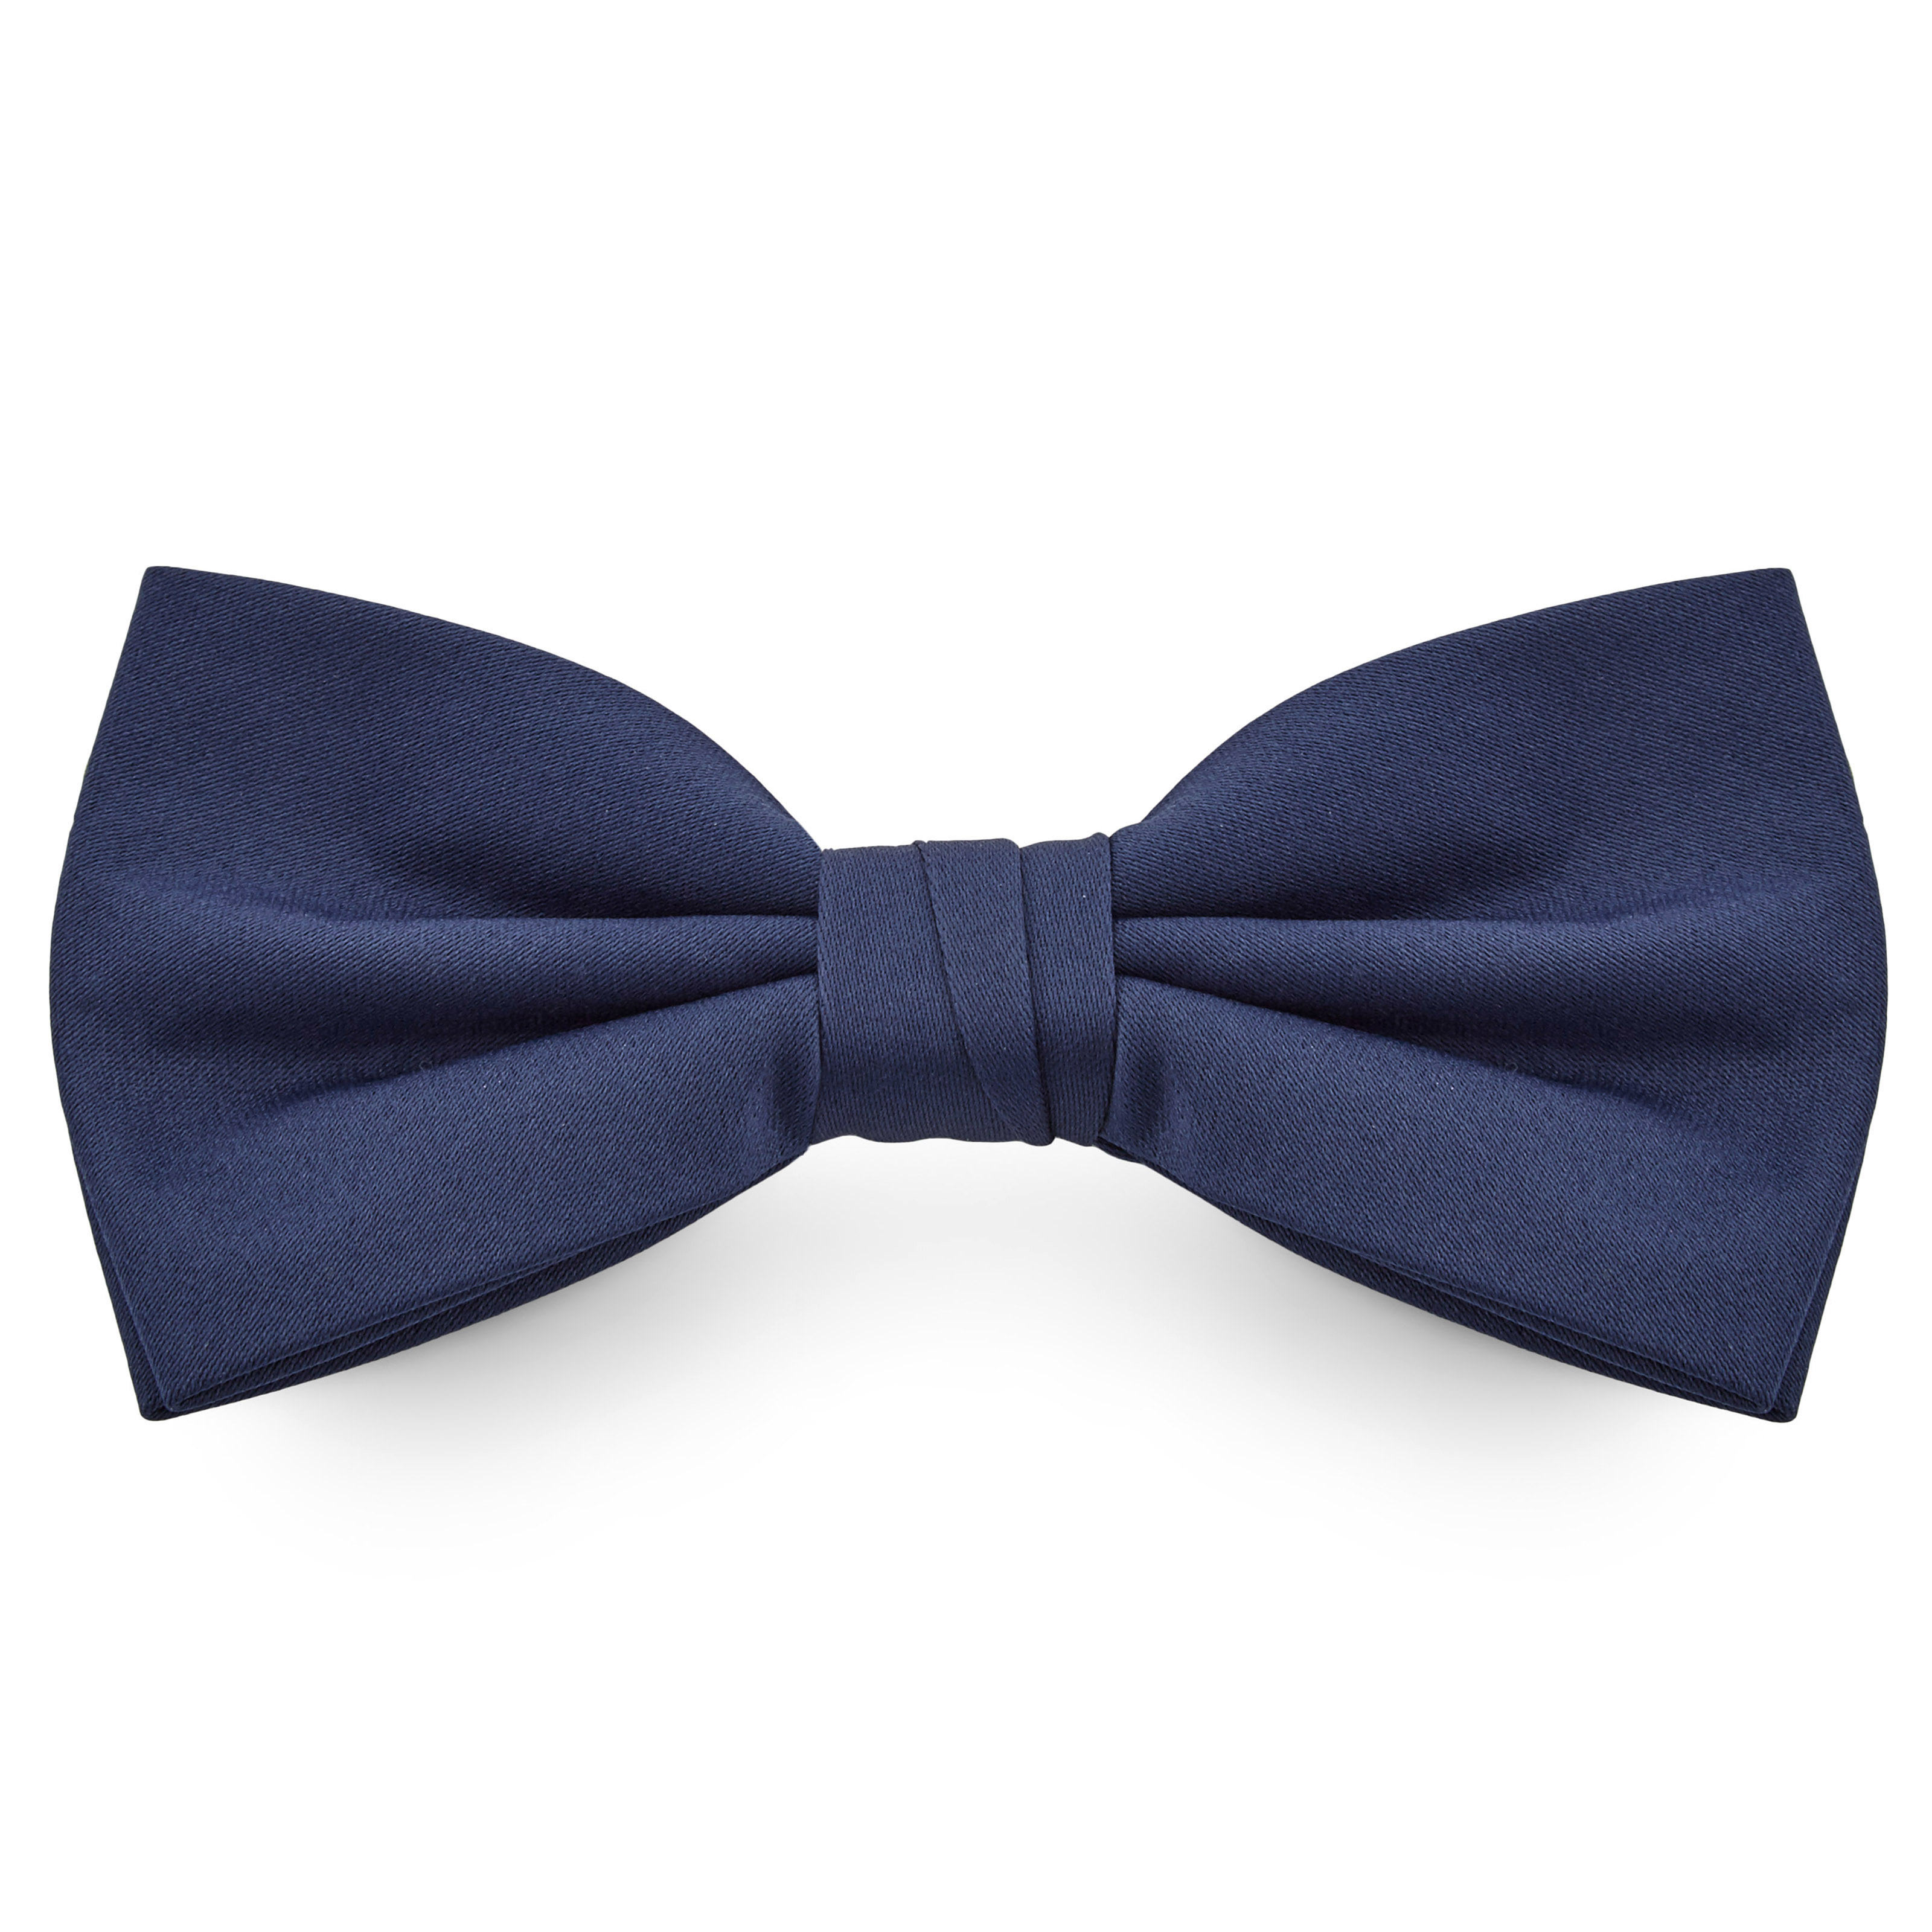 How to Wear a Bow Tie (And Wear It Well)